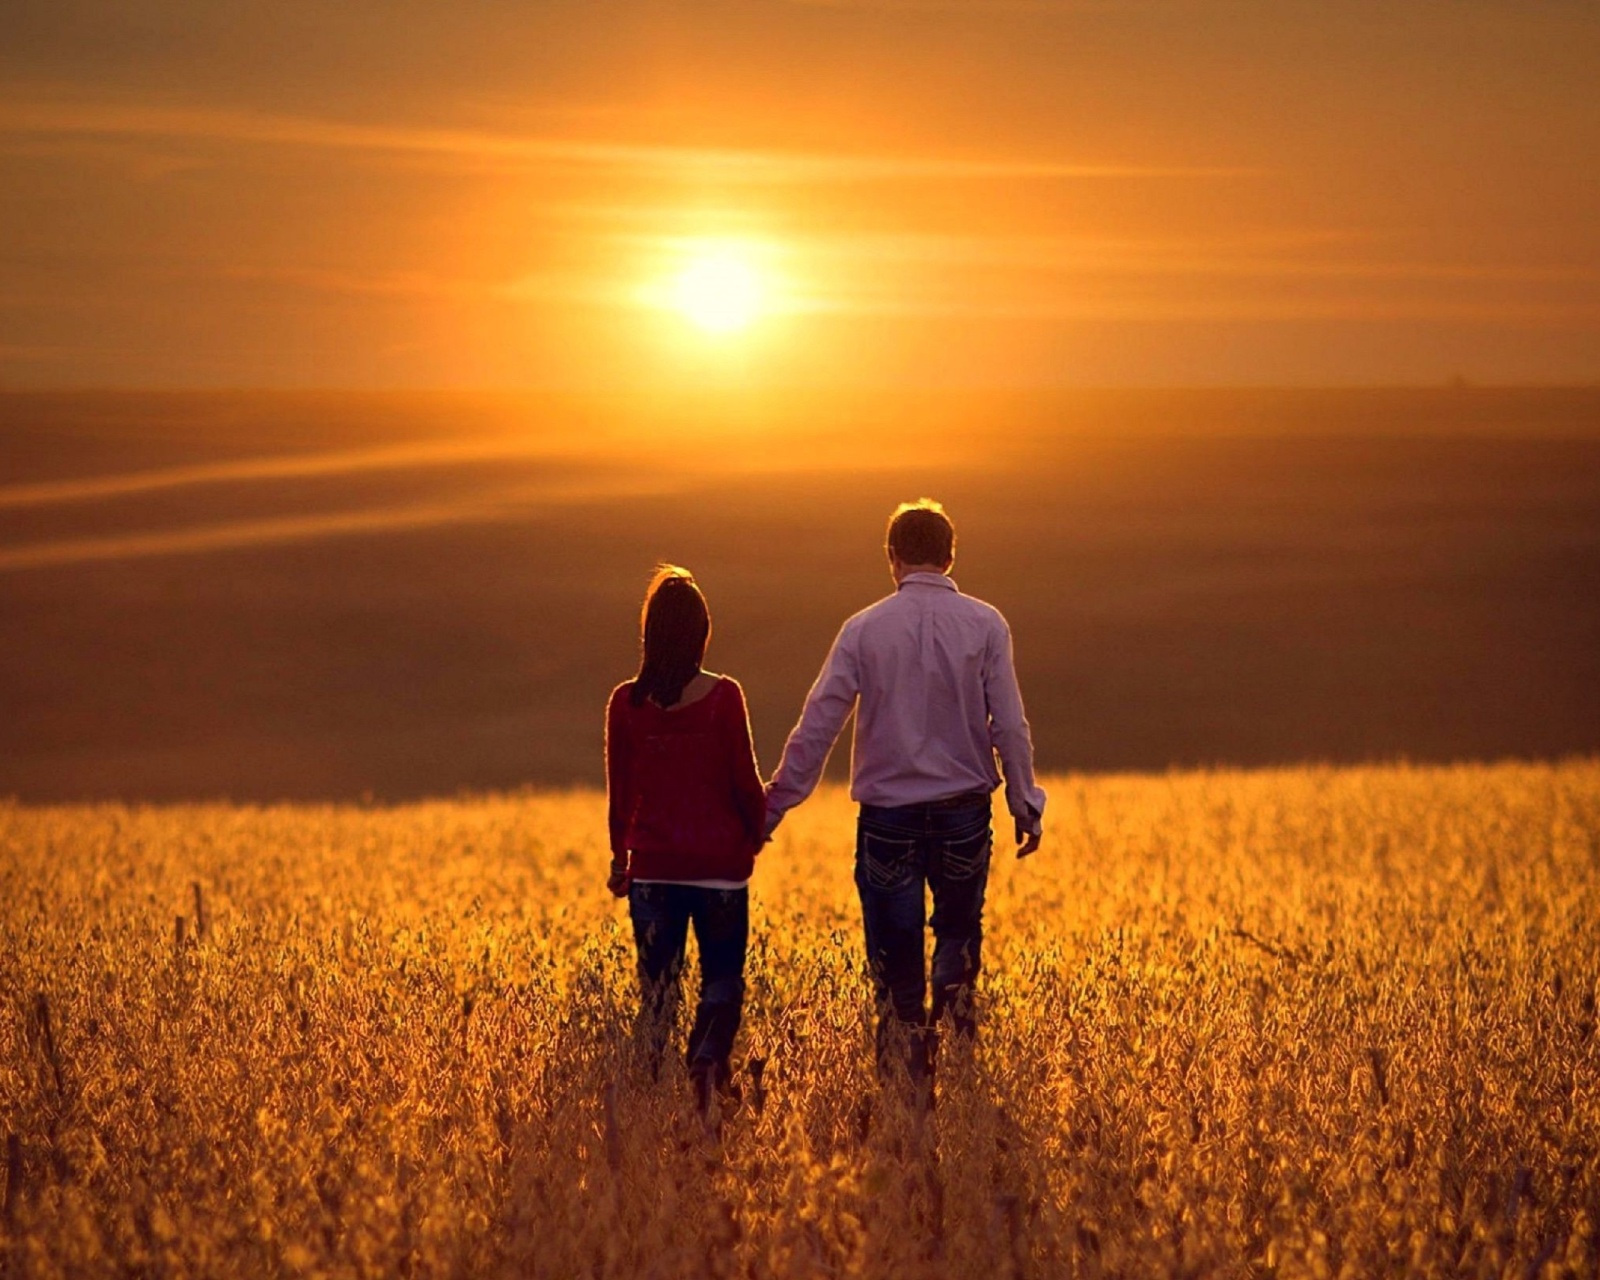 Couple at sunset wallpaper 1600x1280